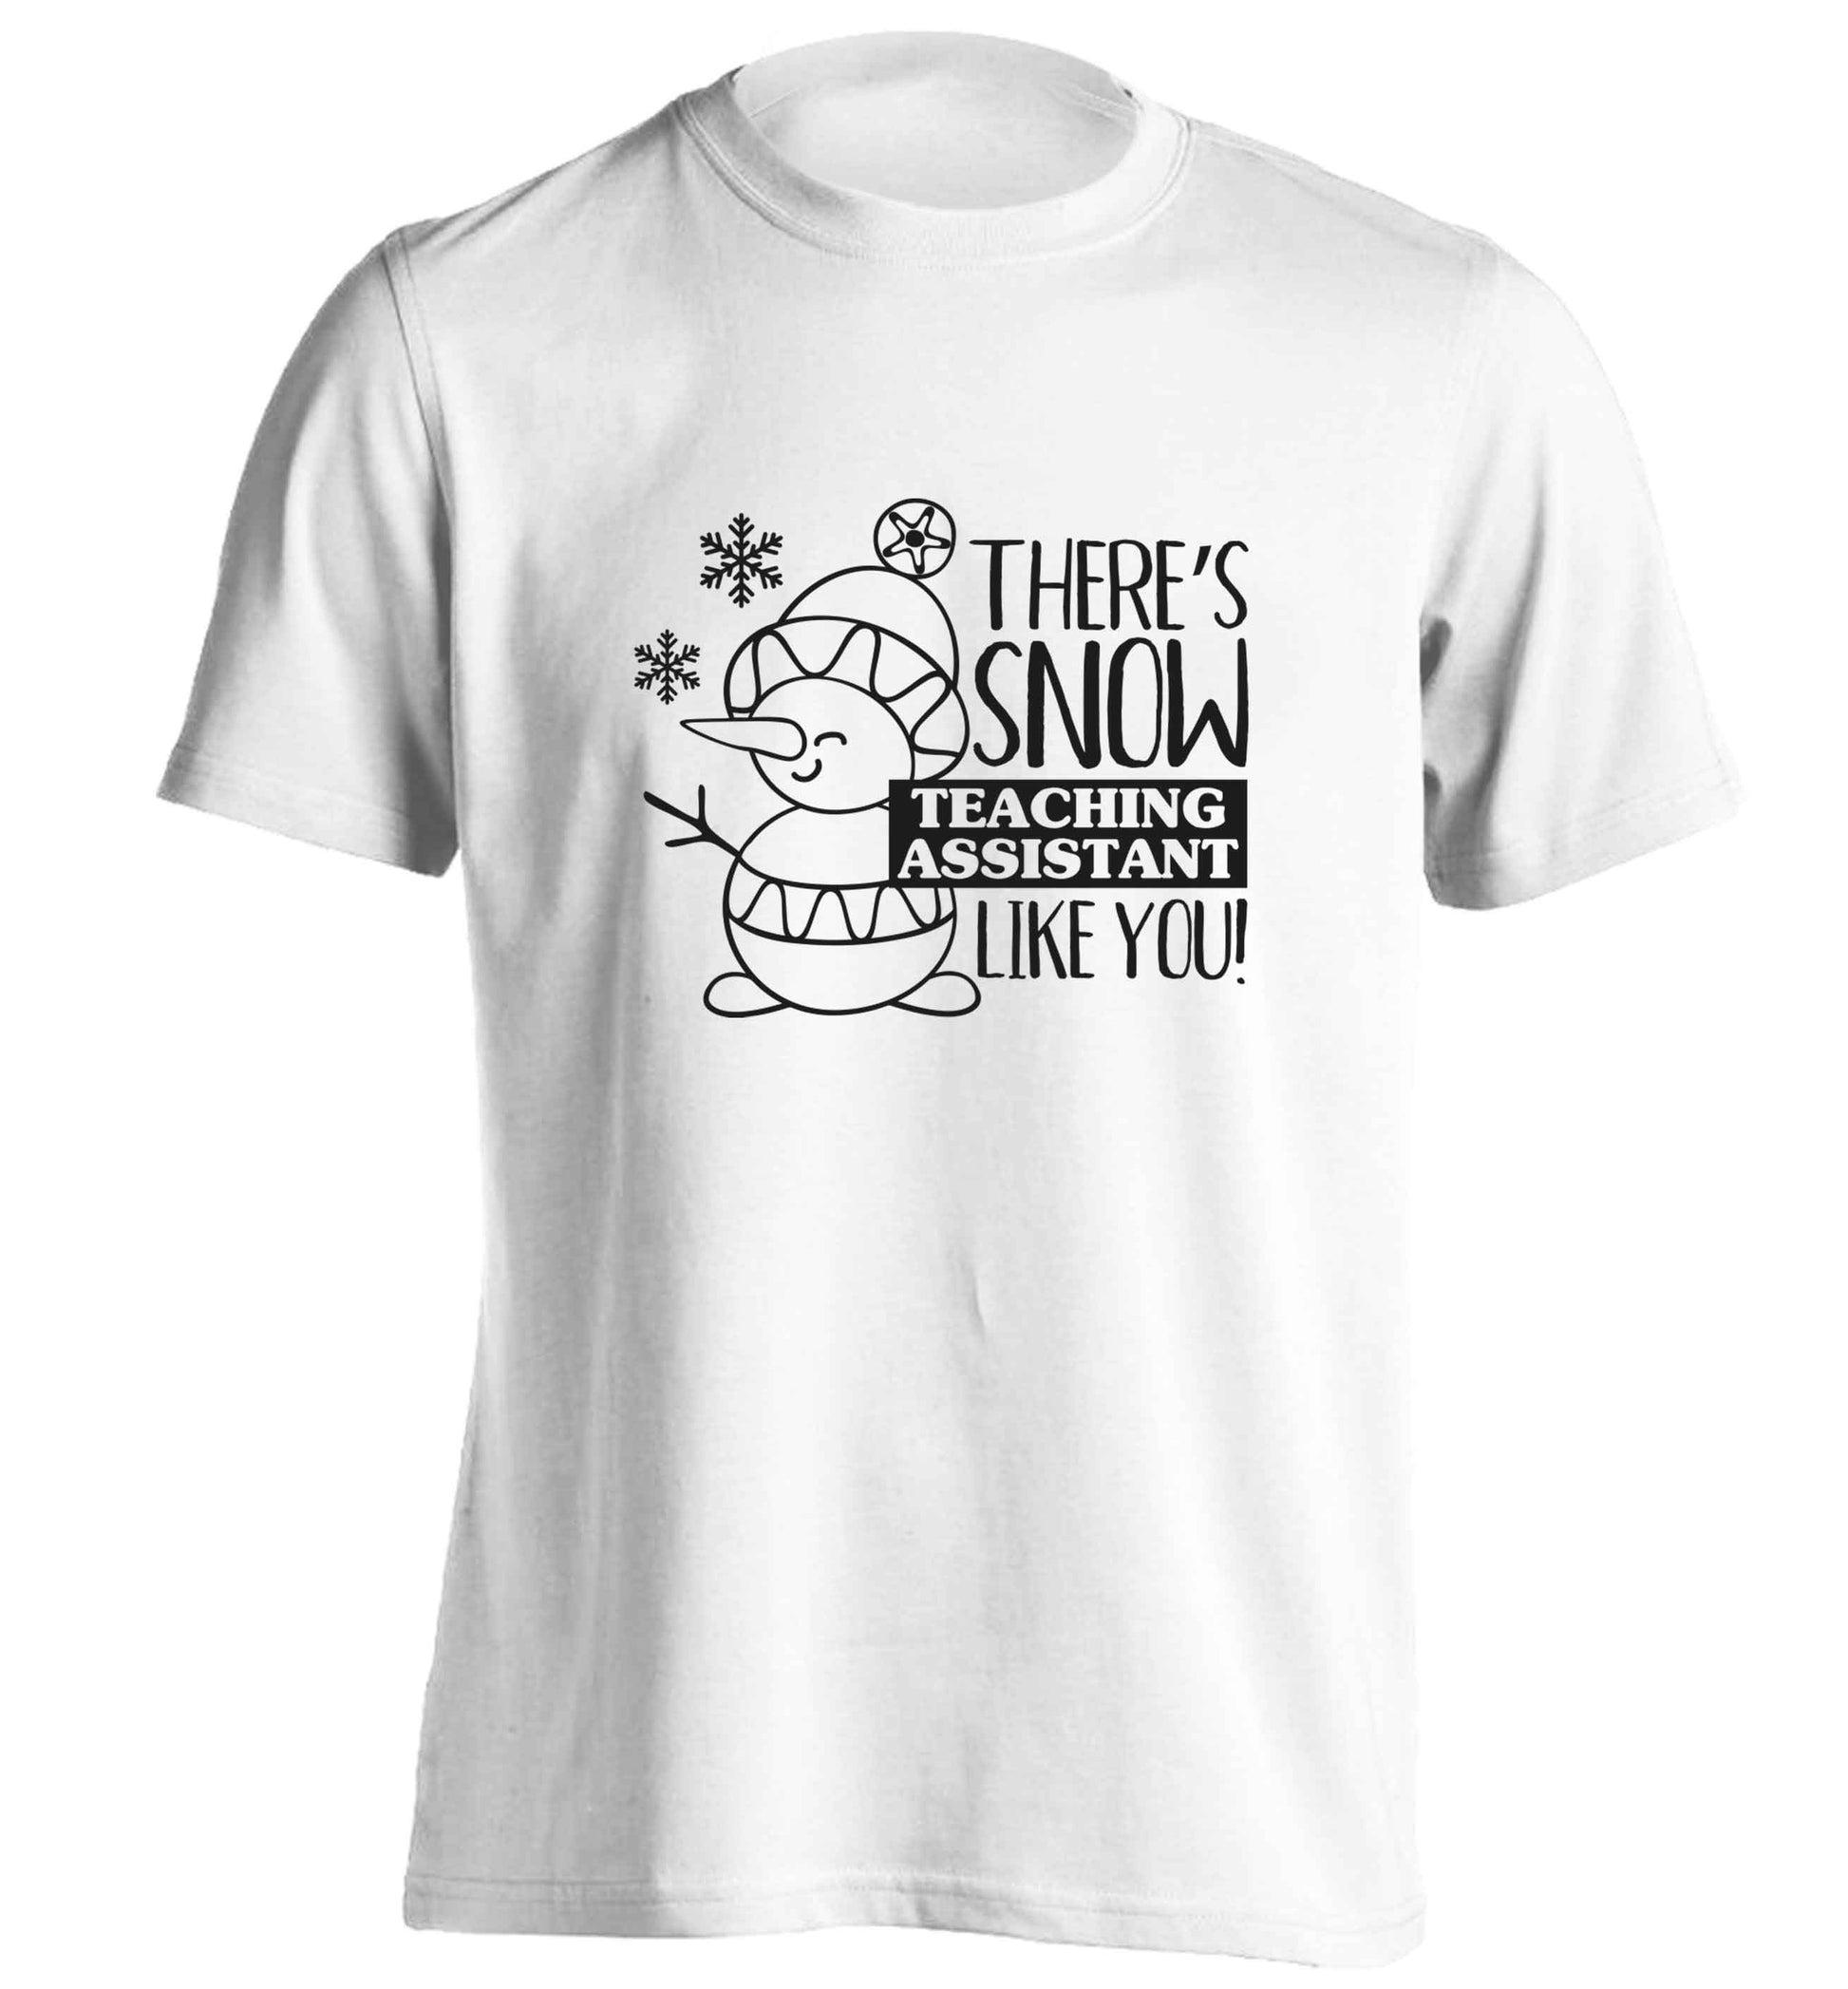 There's snow teaching assistant like you adults unisex white Tshirt 2XL